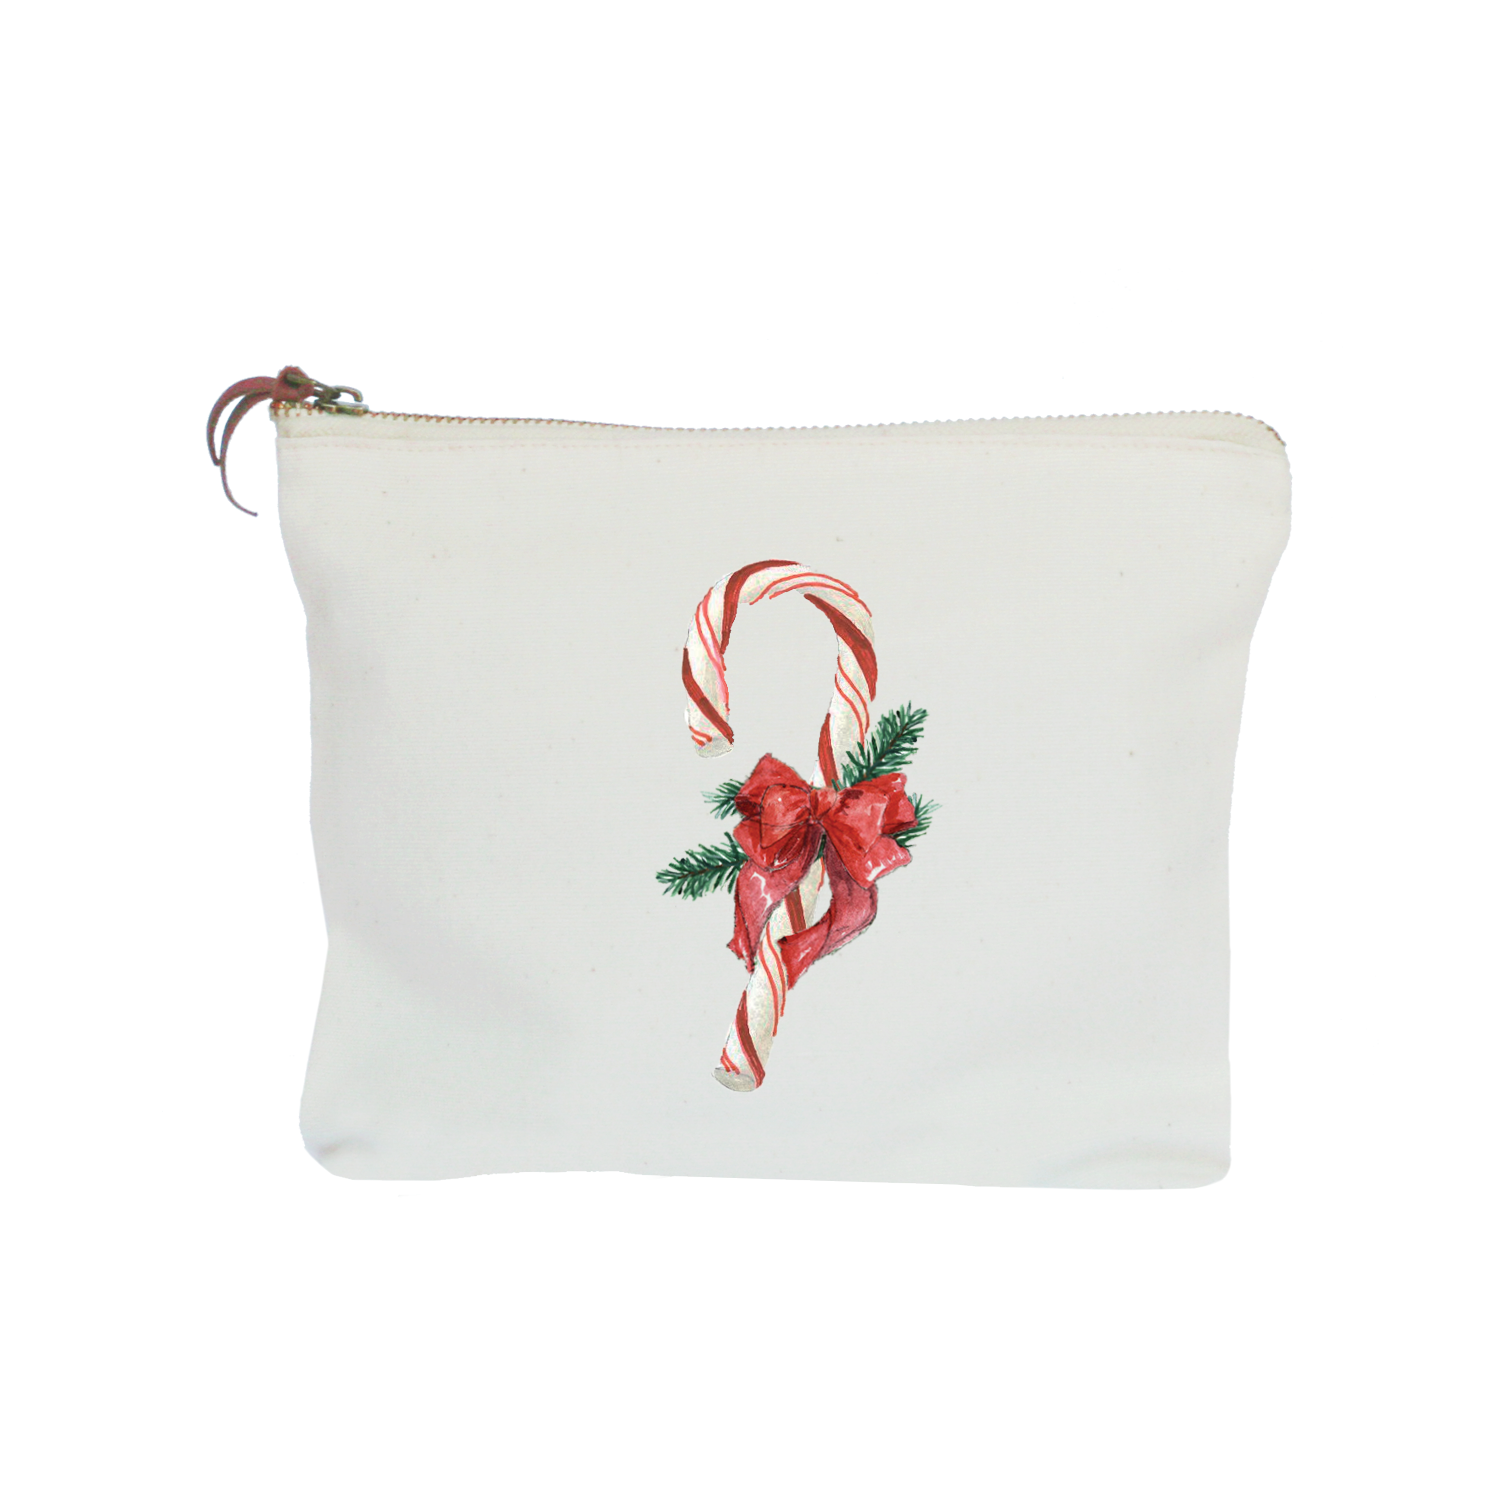 candy cane with bow and evergreens zipper pouch